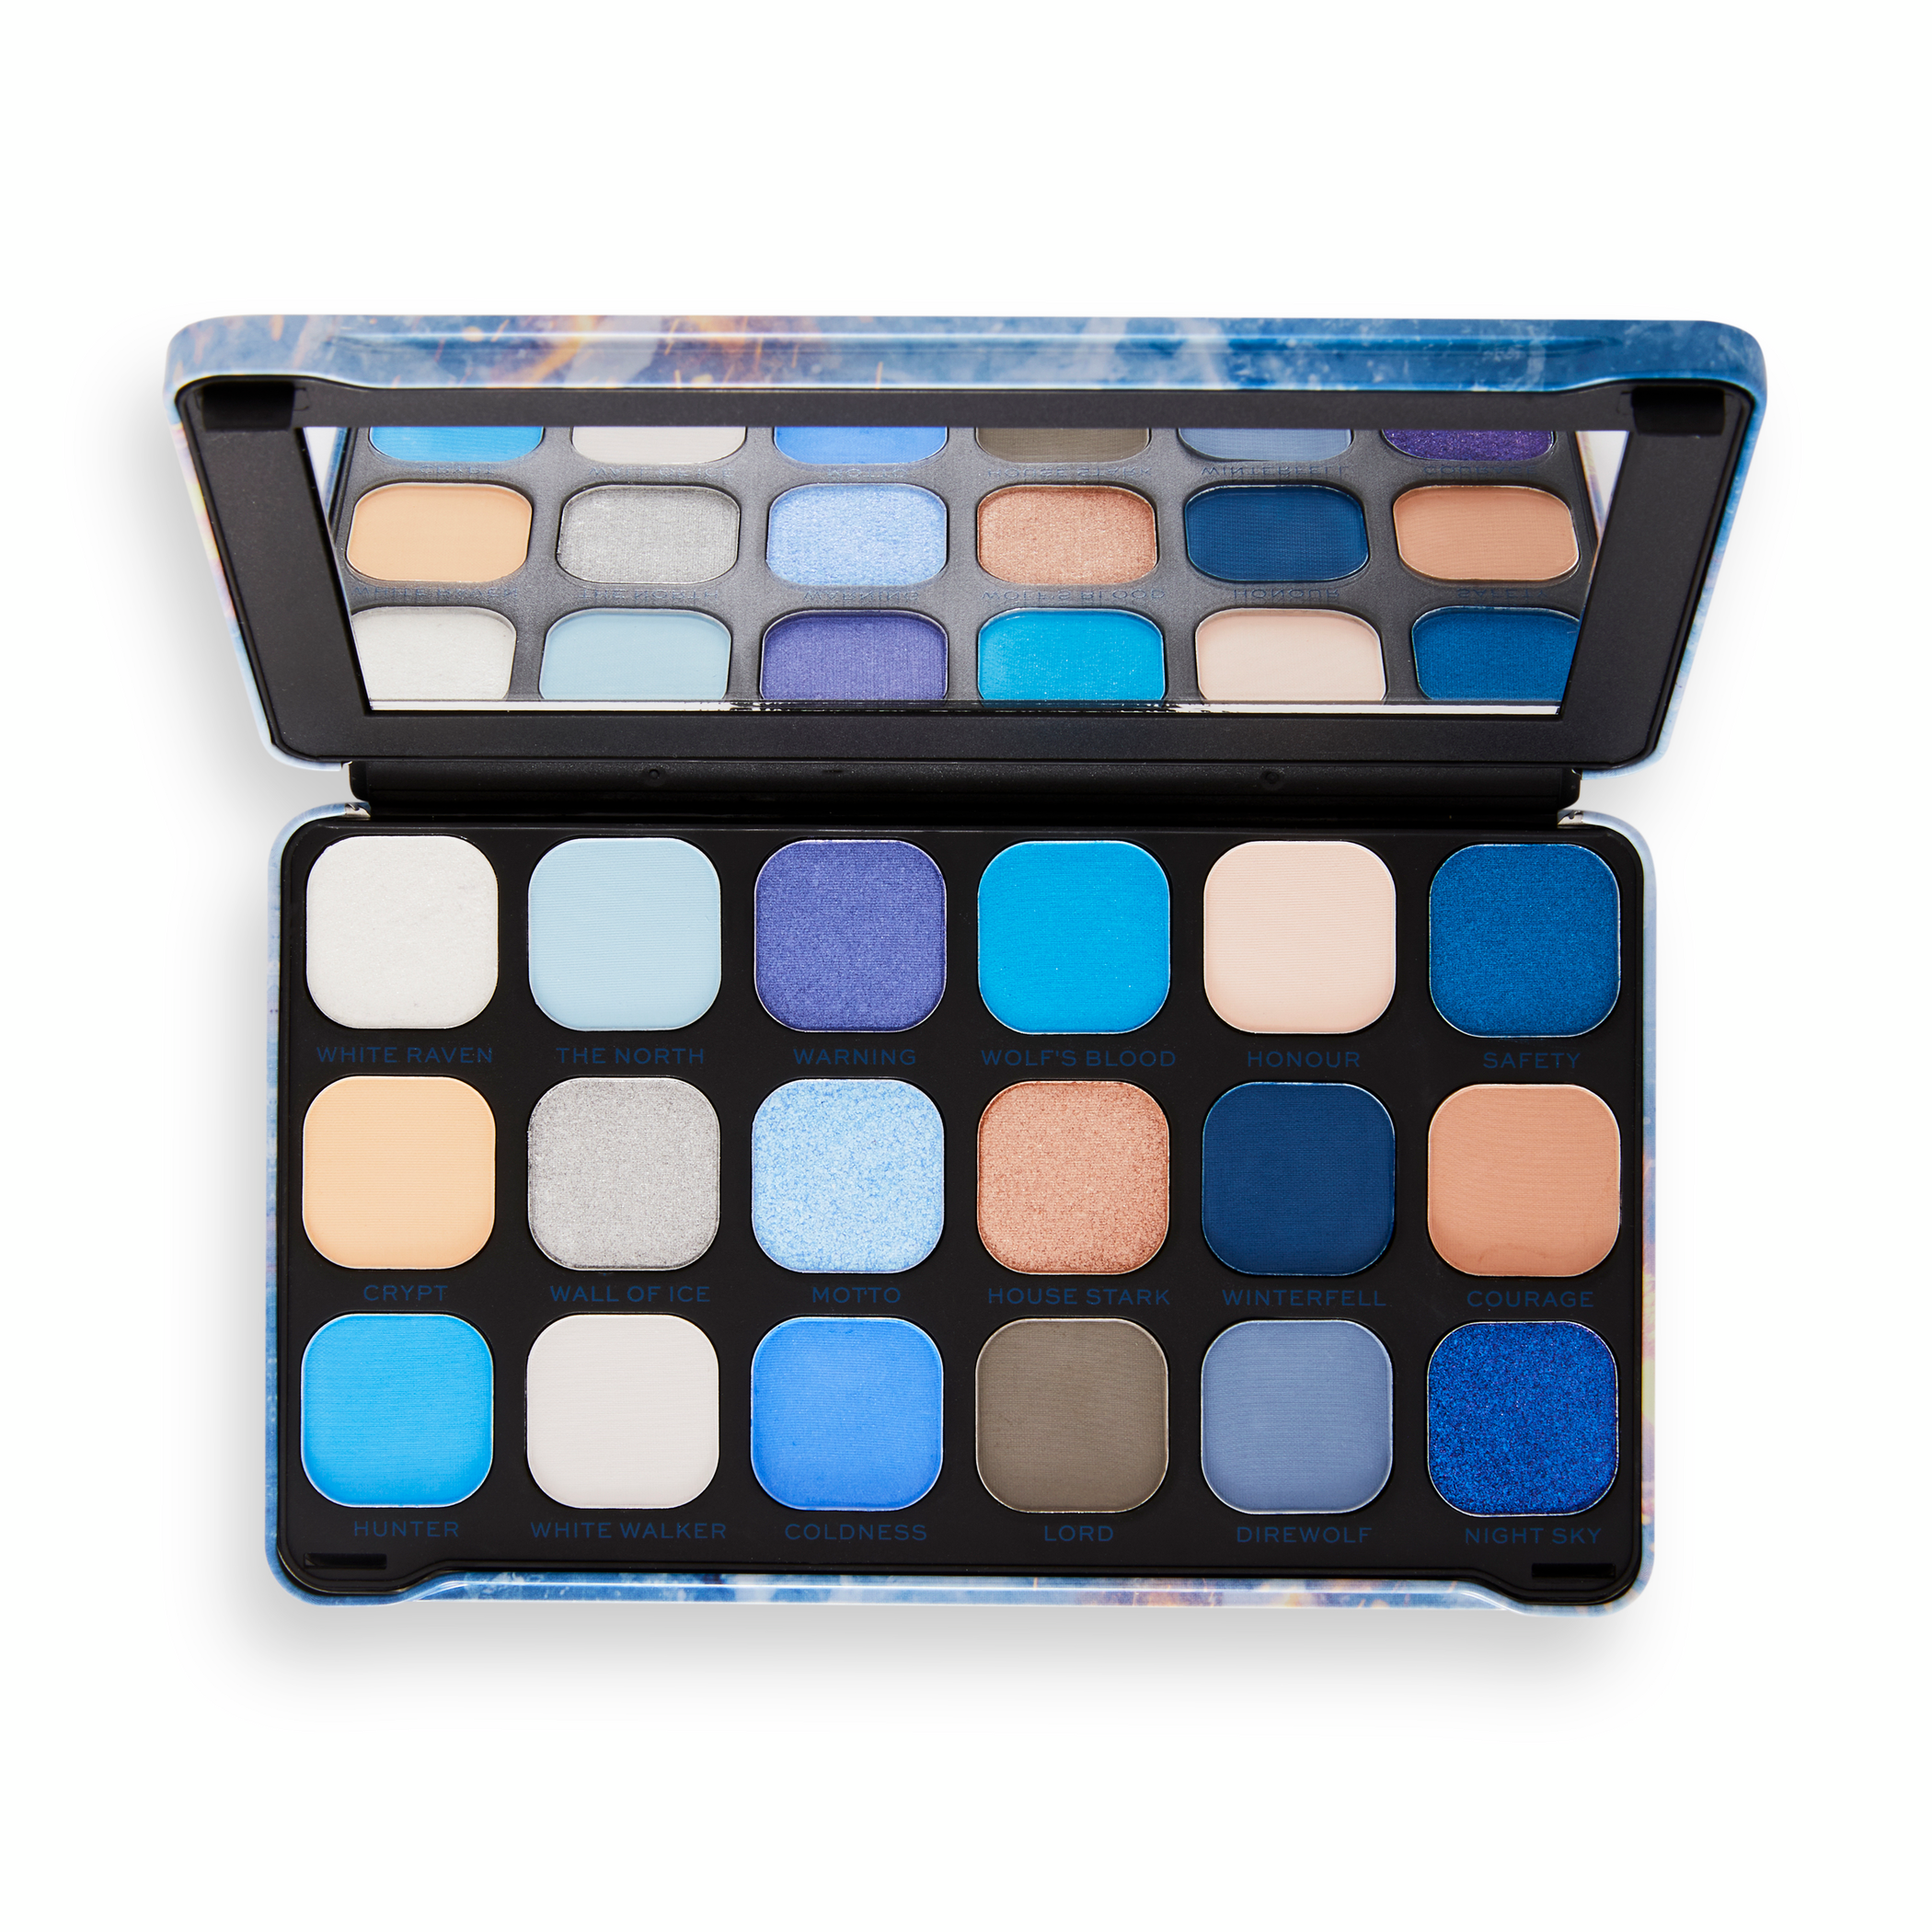 MAKEUP REVOLUTION X Game Of Thrones Winter is Coming Forever Flawless Eyeshadow Palette